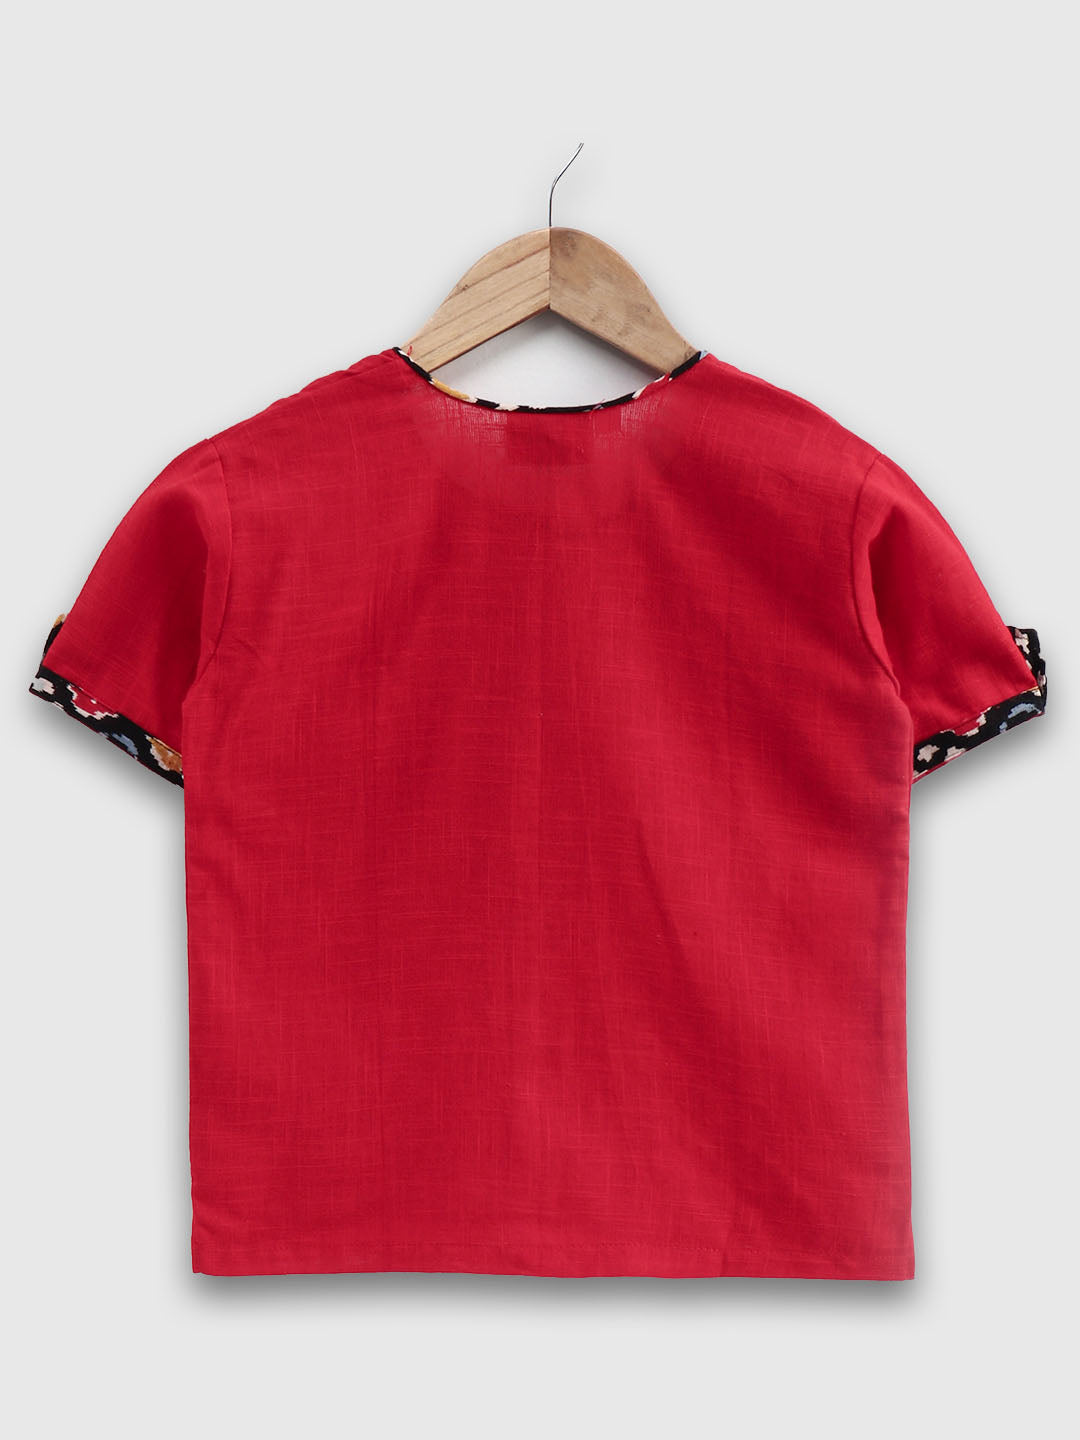 BownBee Cotton Half Sleeve Shirt For Baby Boys- Red